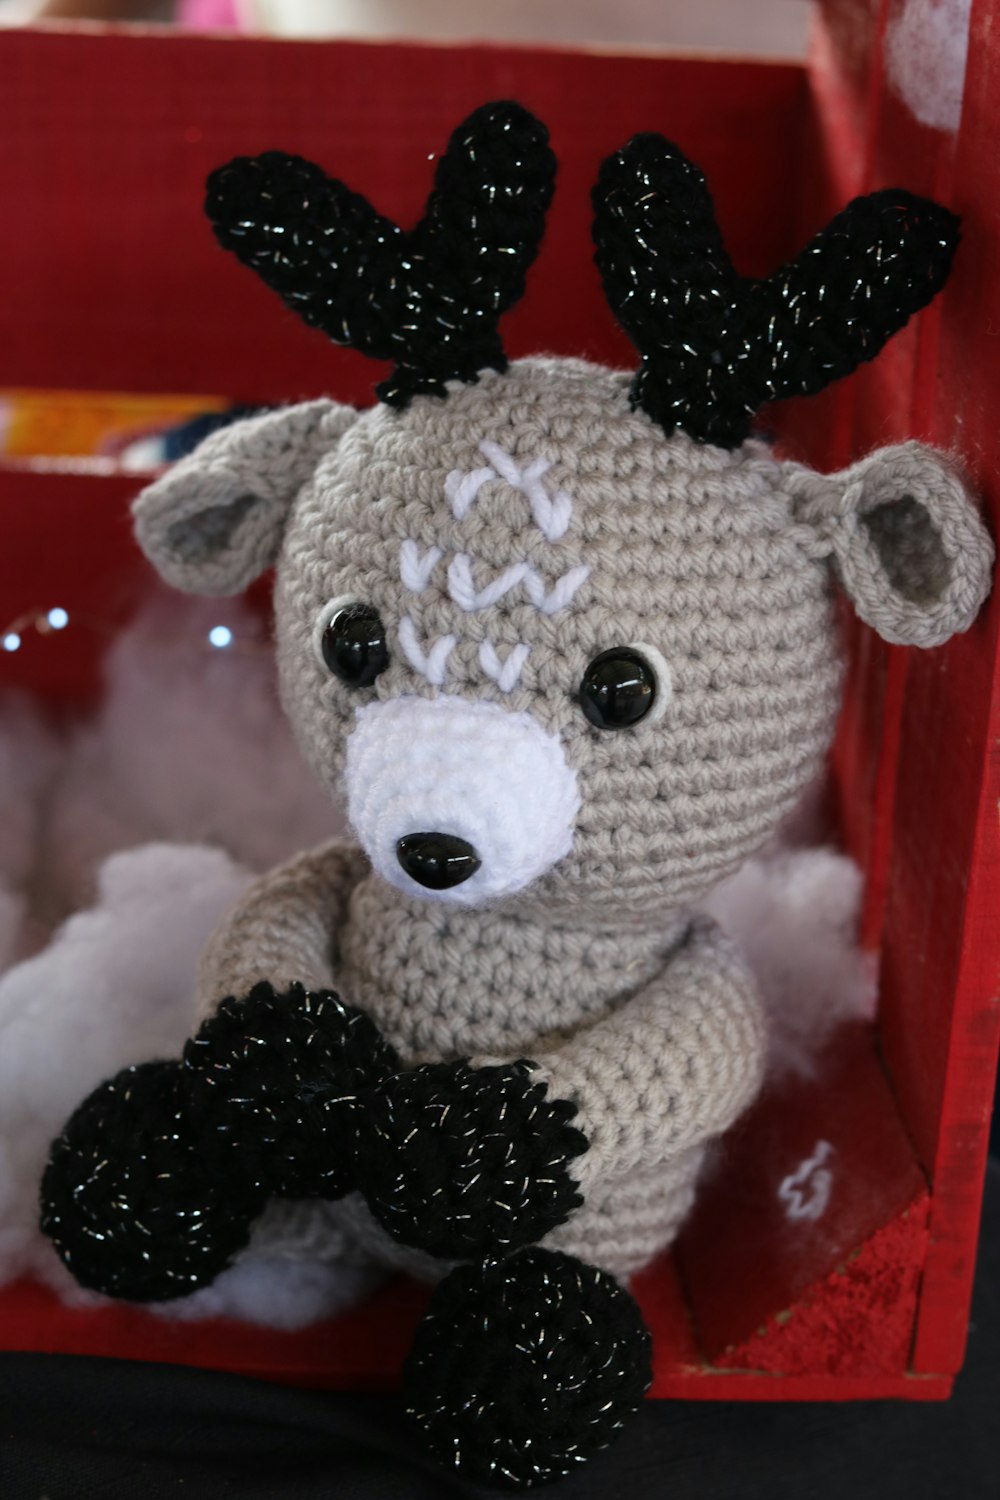 a crocheted stuffed animal in a red box